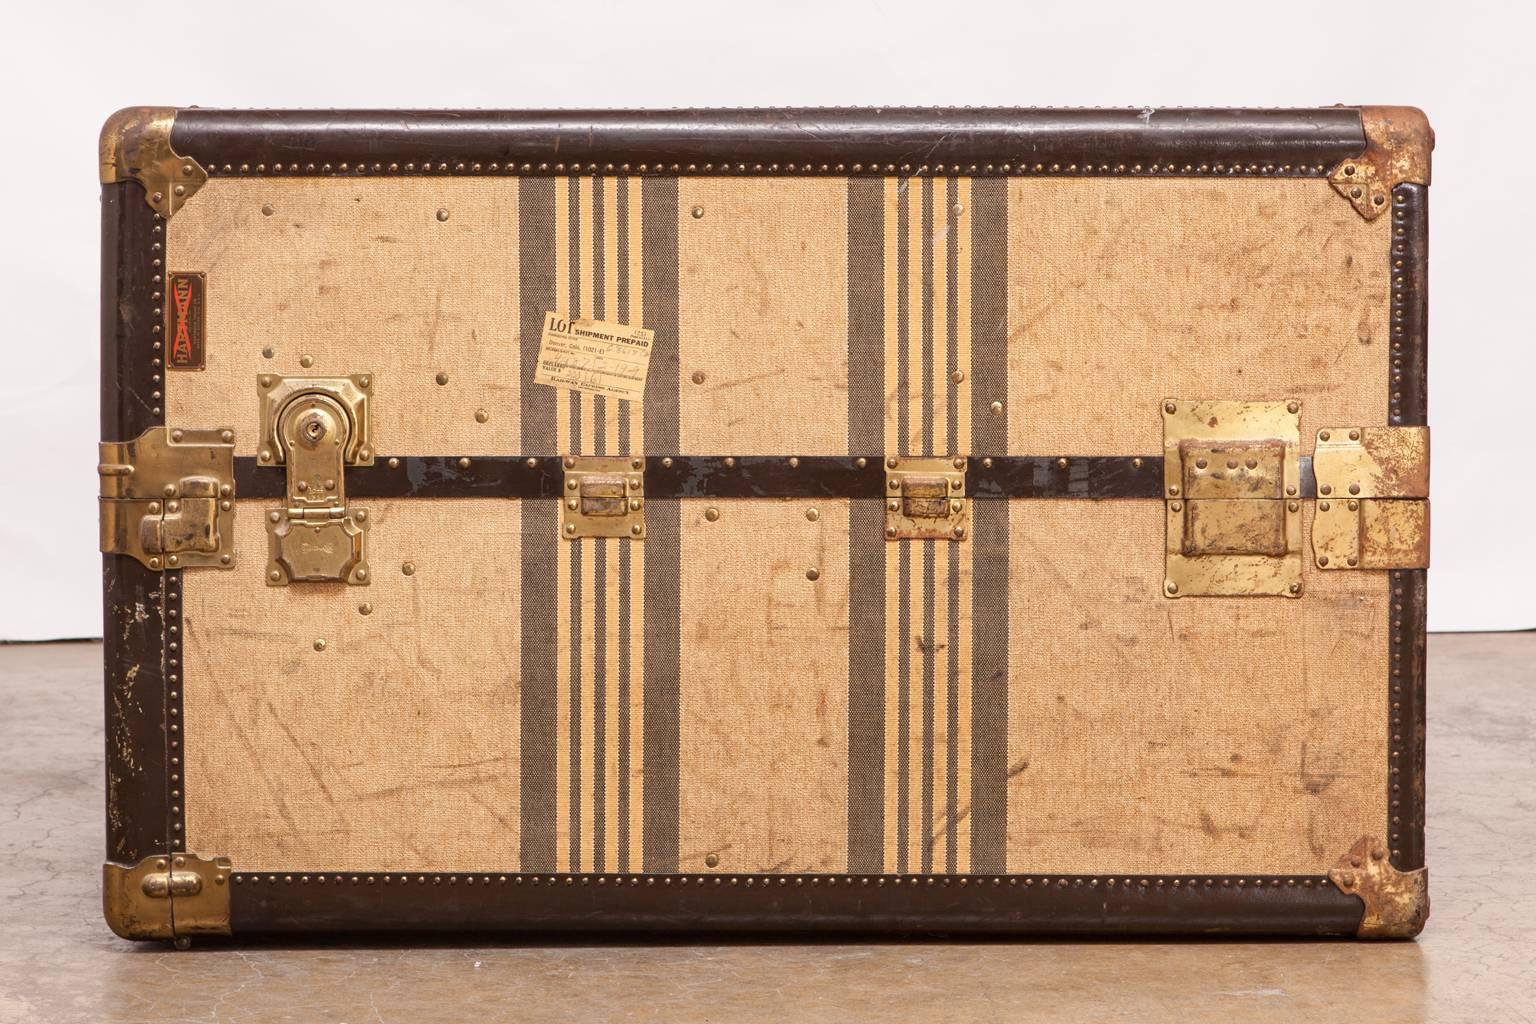 Exceptional canvas striped wardrobe steamer trunk made in the Louis Vuitton style by Hartmann belonging to Sylvia McLaughin (born Sylvia Cranmer, 1916-2016) an American pioneer in environmentalism. She founded the San Francisco Bay Association known